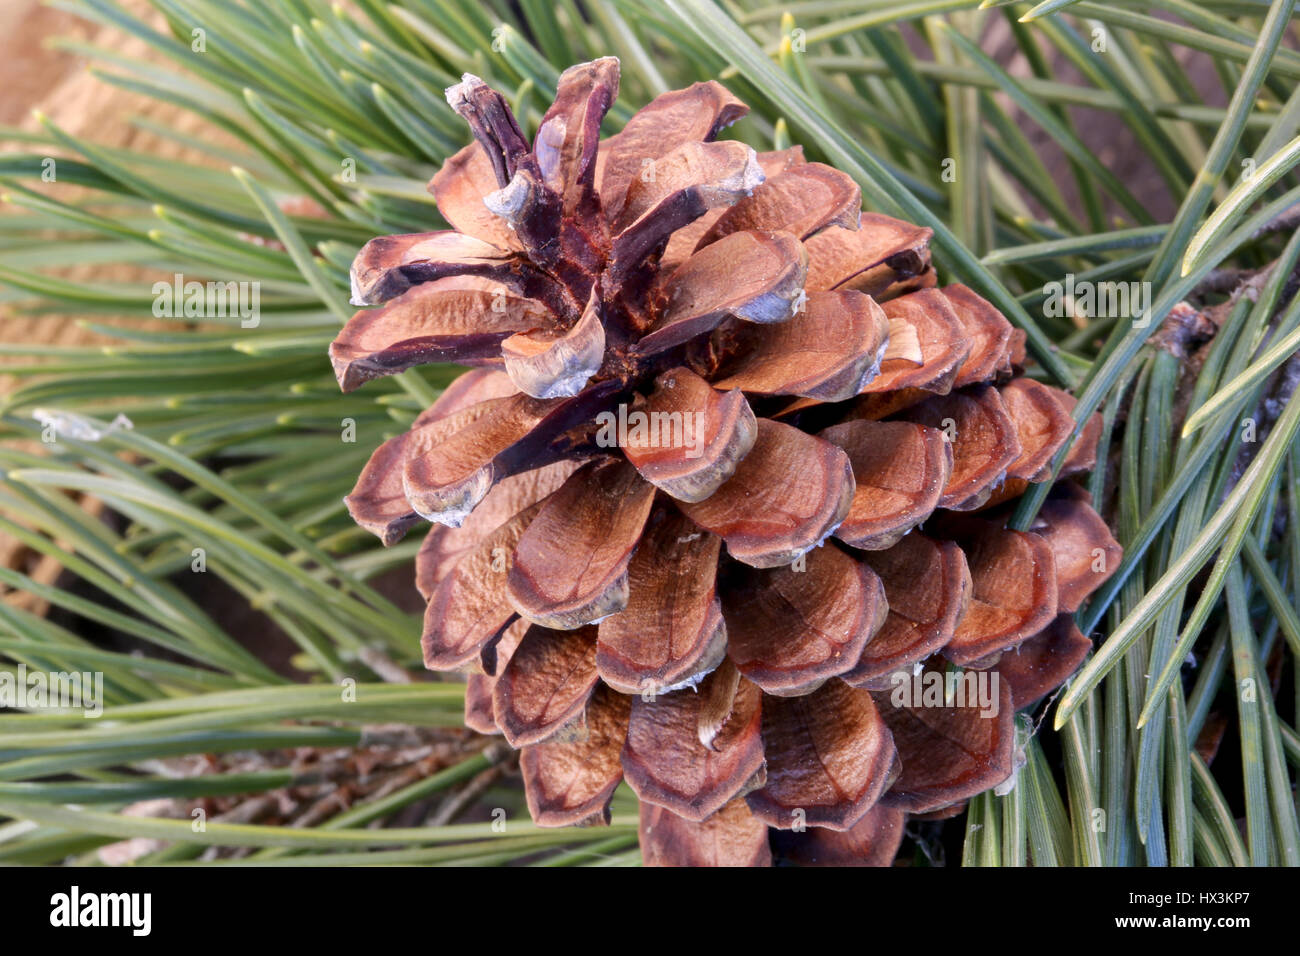 macro photograph of a dry pine cone with green pine needles Stock Photo